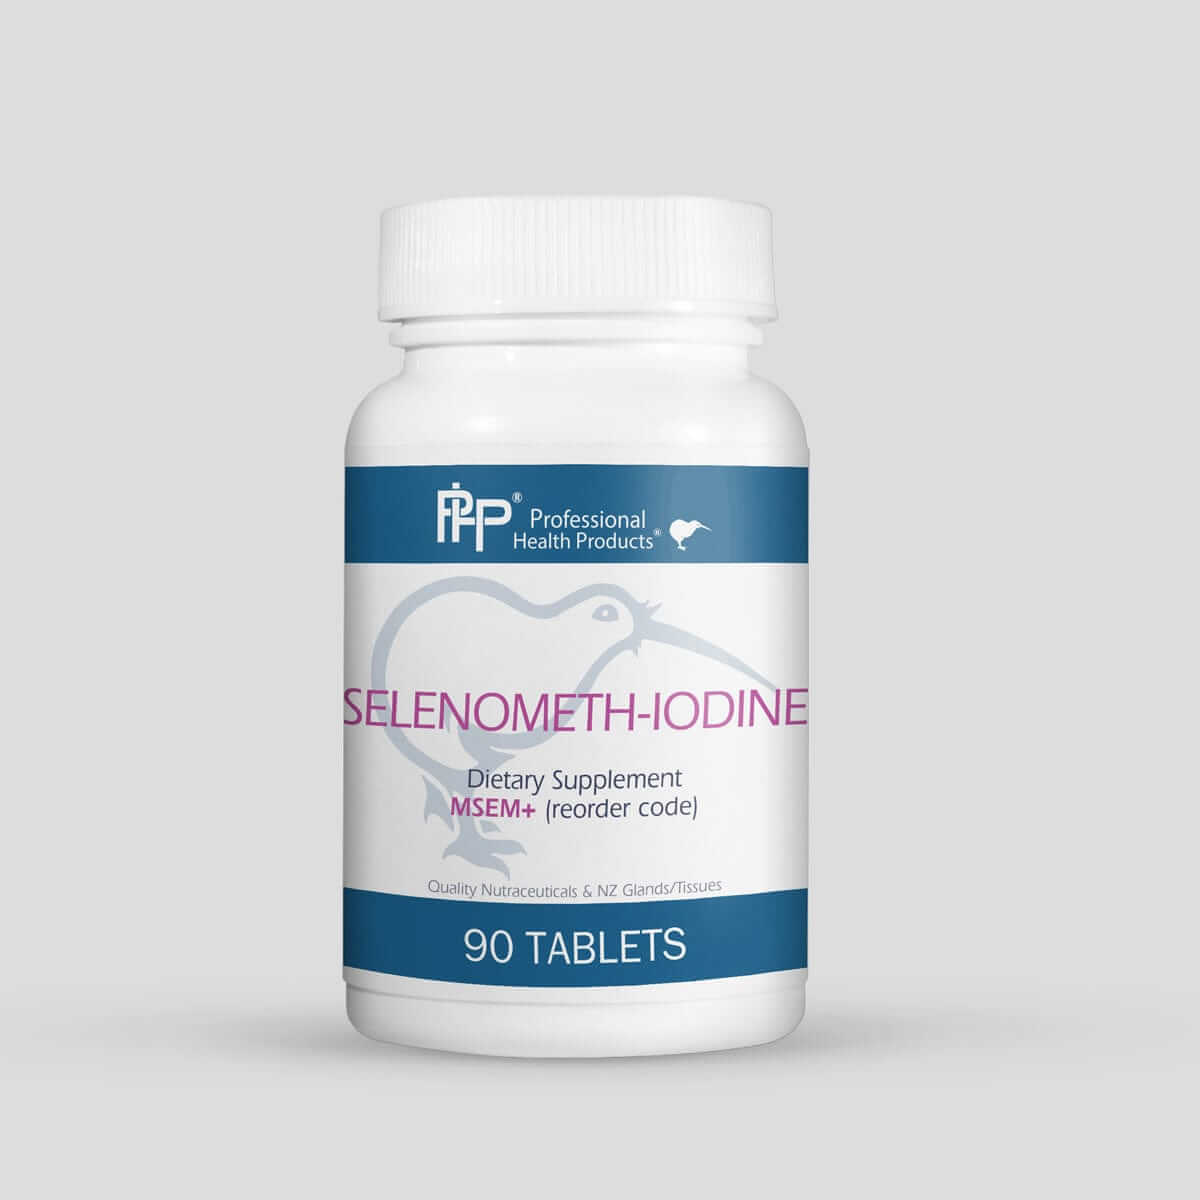 Selenometh-Iodine * Prof Health Products Supplement - Conners Clinic